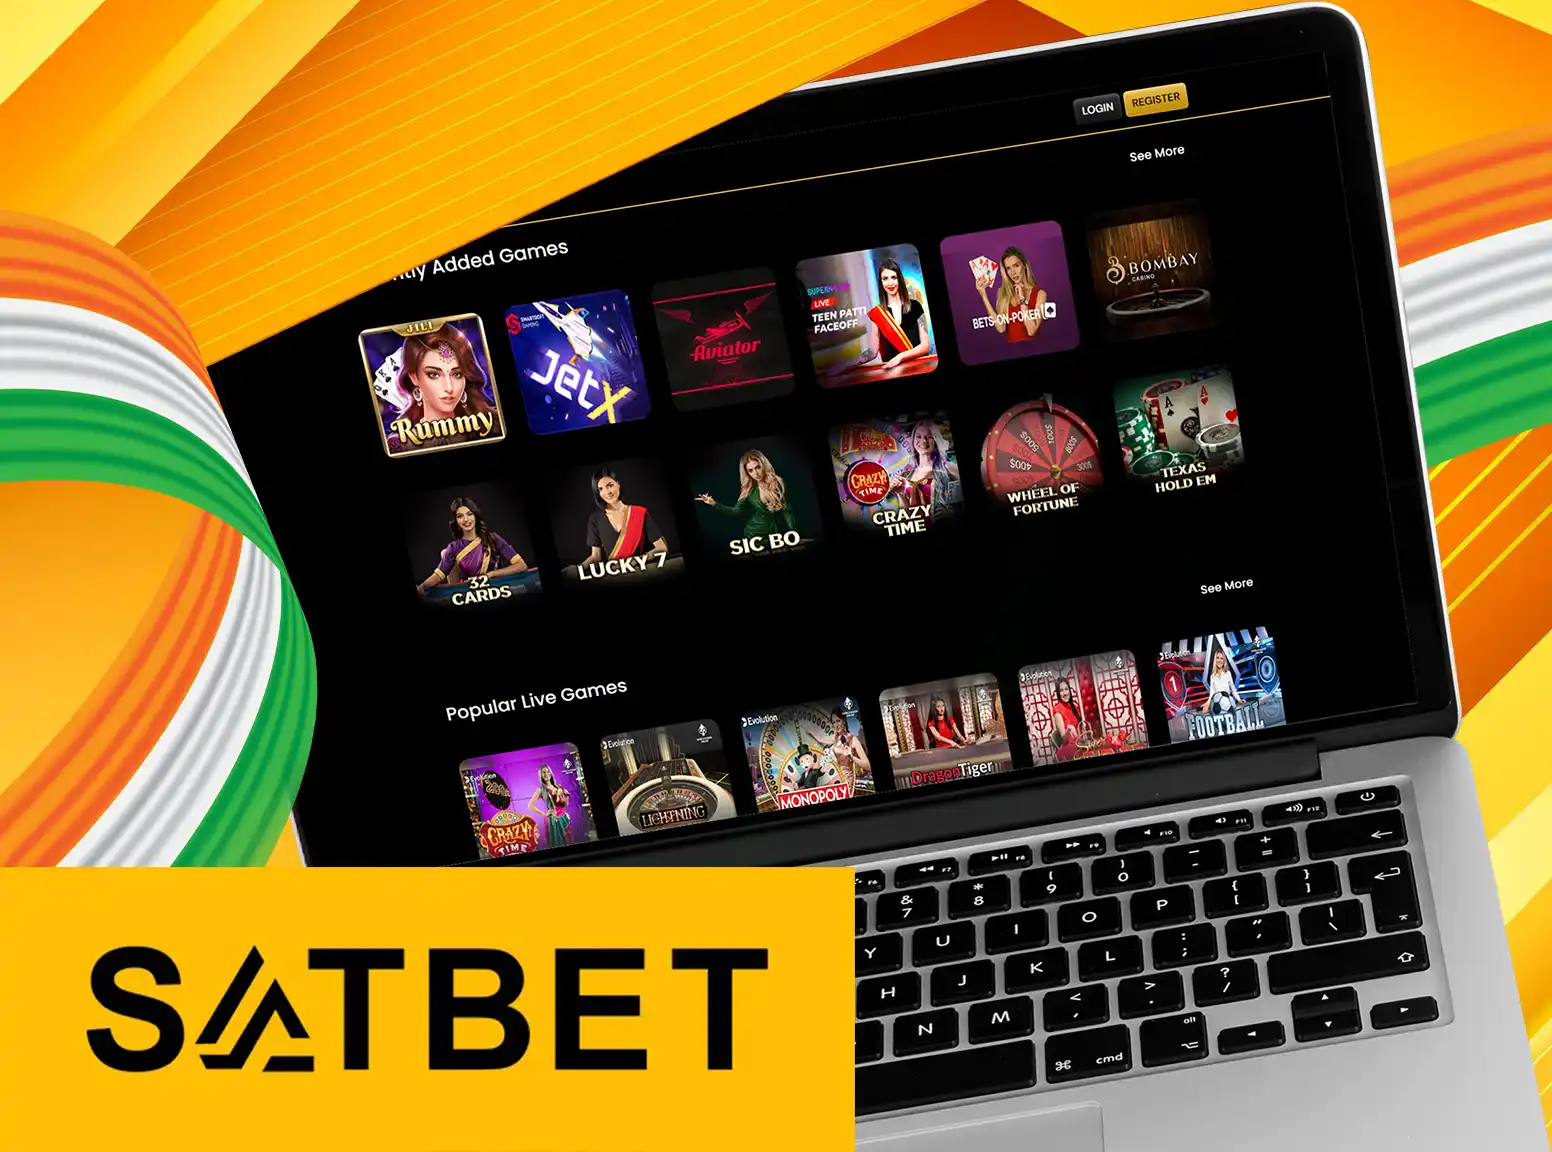 Satbet is authorized in India and operates under a license.